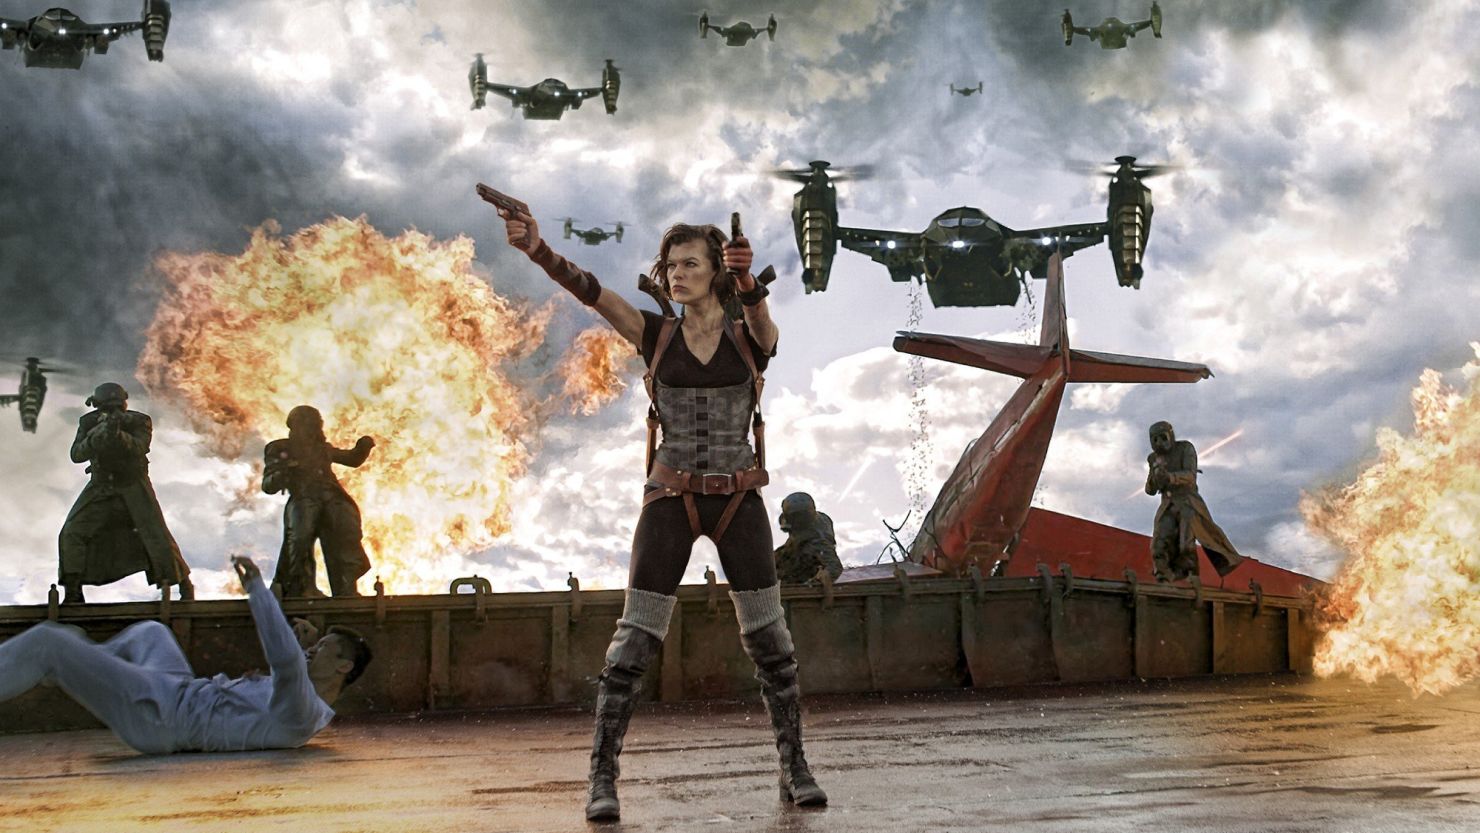  "Resident Evil: Retribution" topped the weekend box office.